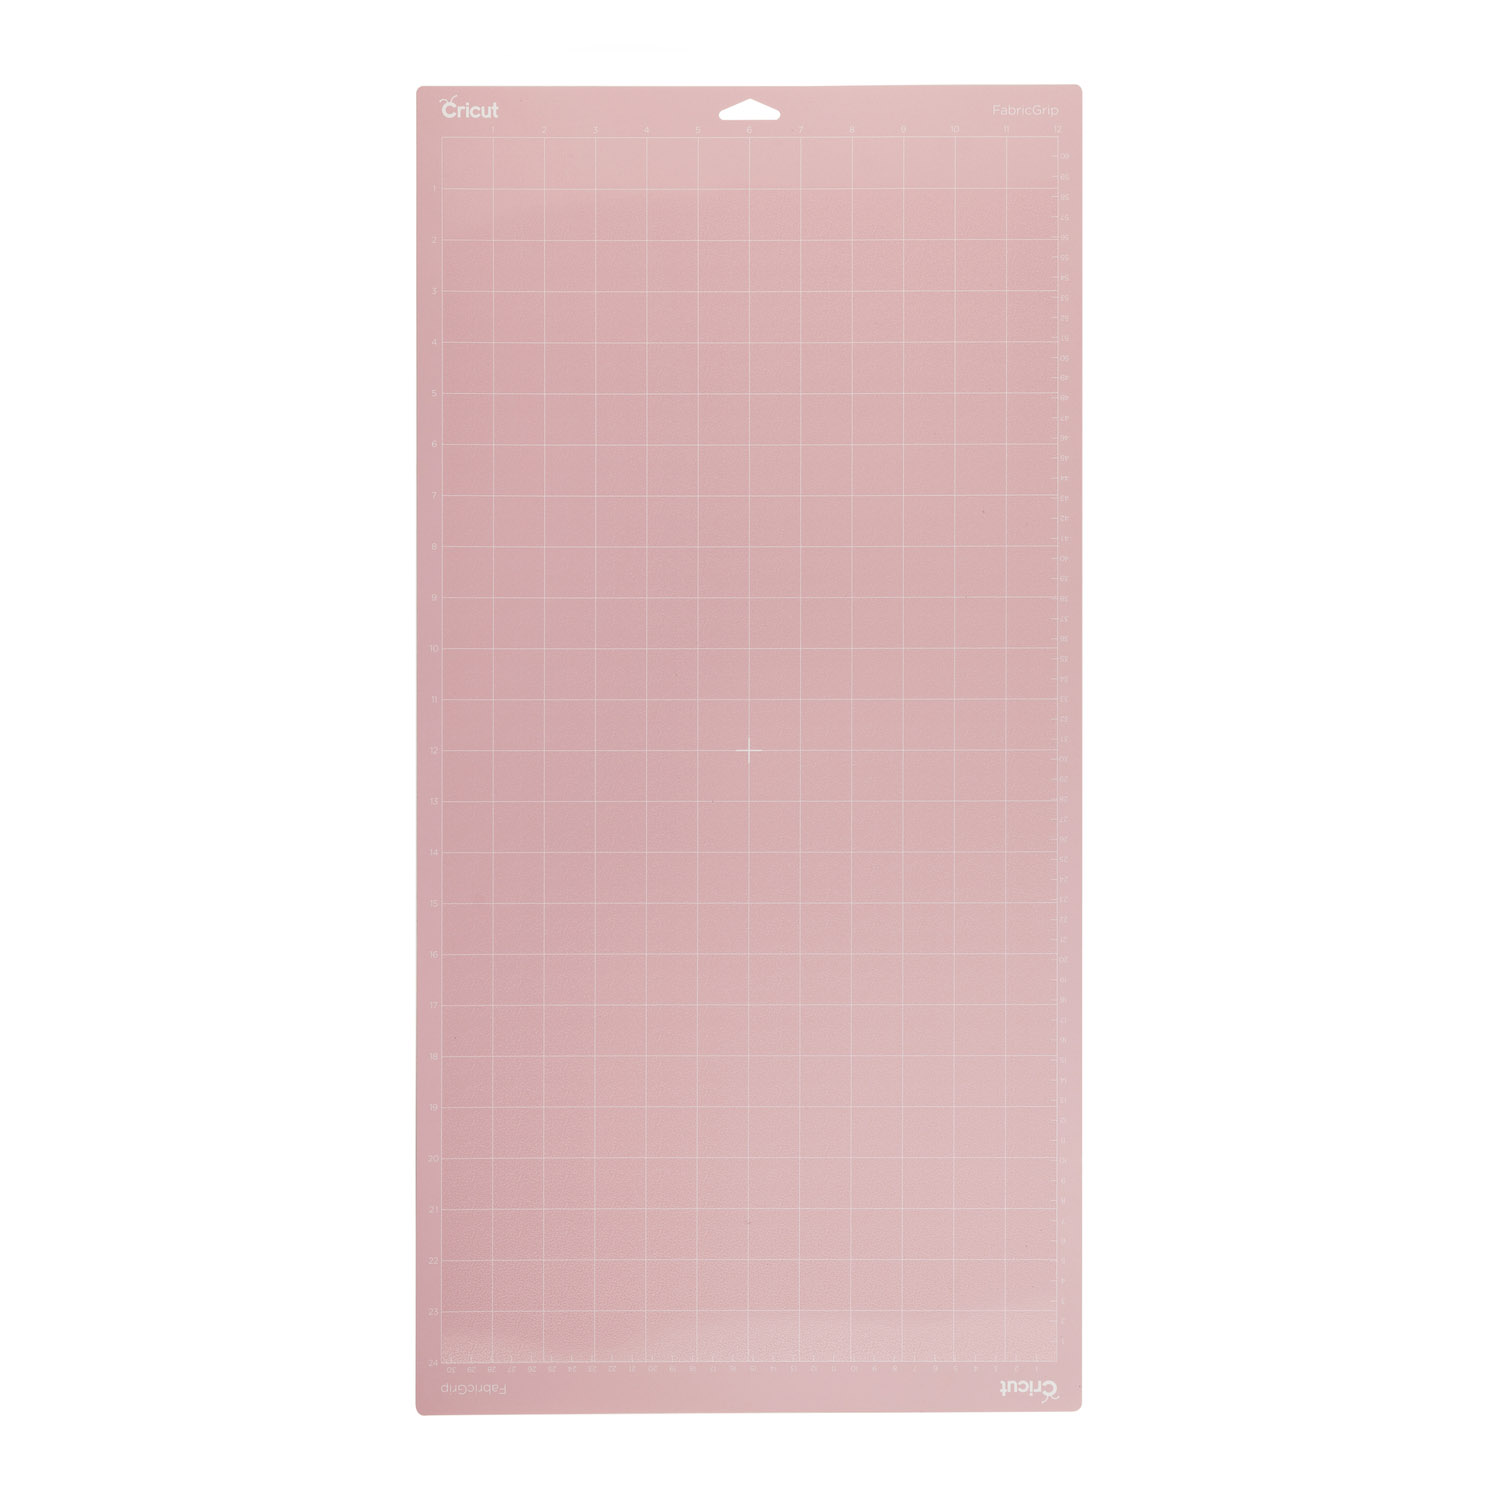 Nicapa Fabric Grip Cutting Mat for Cricut Explore Air 2 Maker(12x12 inch,3 Pack) Fabric Adhesive Sticky Pink Quilting Cricket Replacement Cut Mats